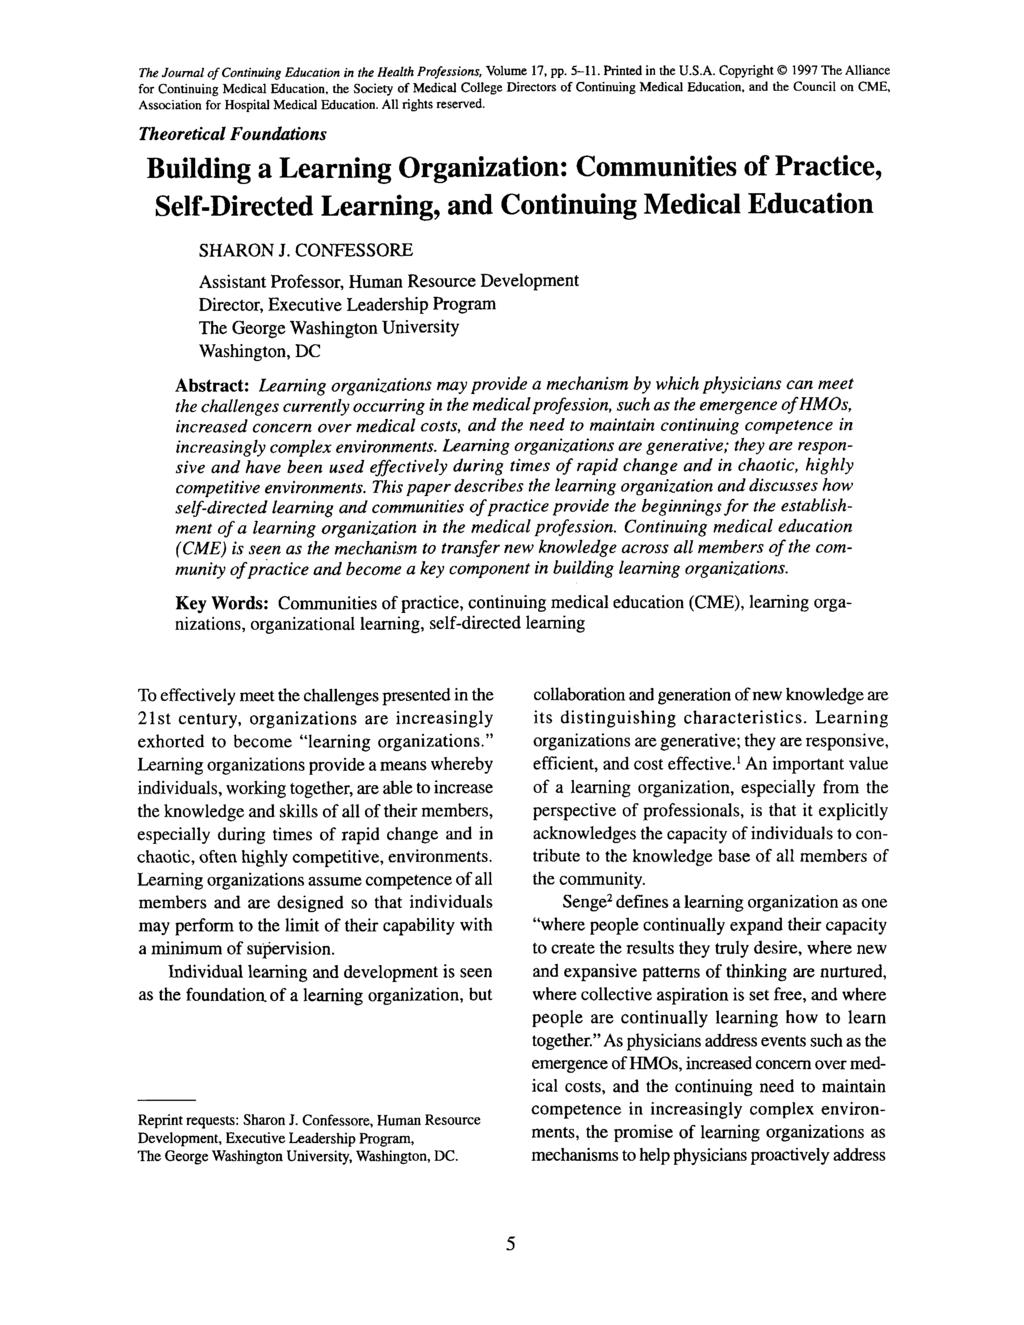 The Journal of Continuing Education in the Health Professions, Volume 17. pp. 5-11. Printed in the U.S.A. Copyright 0 1997 The Alliance for Continuing Medical Education.